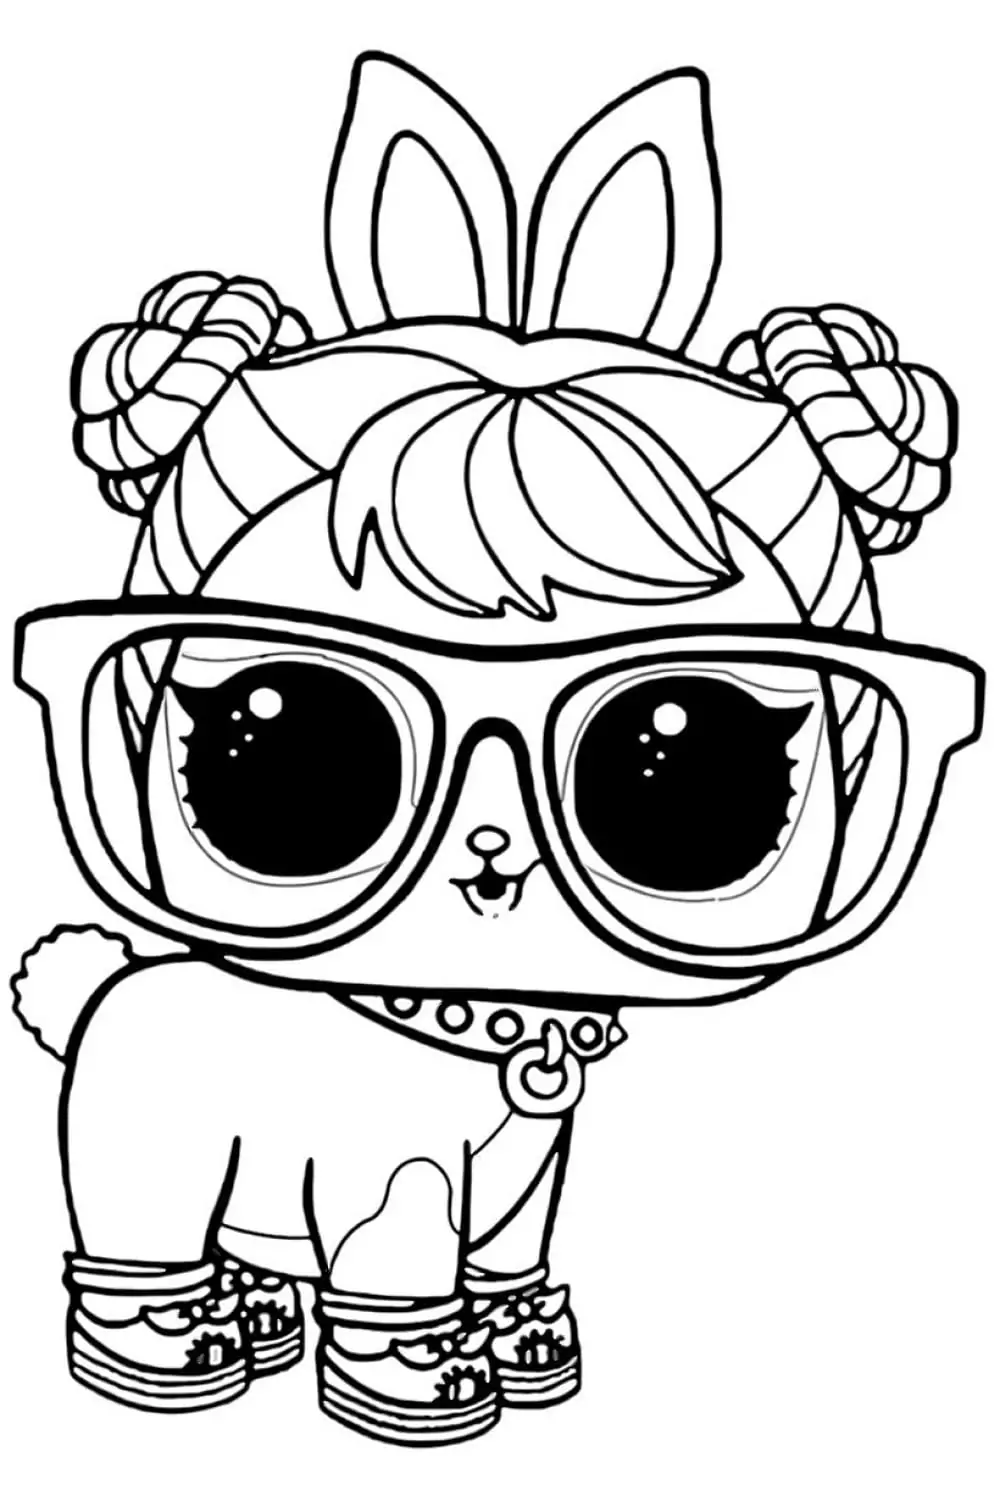 Crystal Bunny Lol Pets Coloring Page - Free Printable Coloring Pages ...